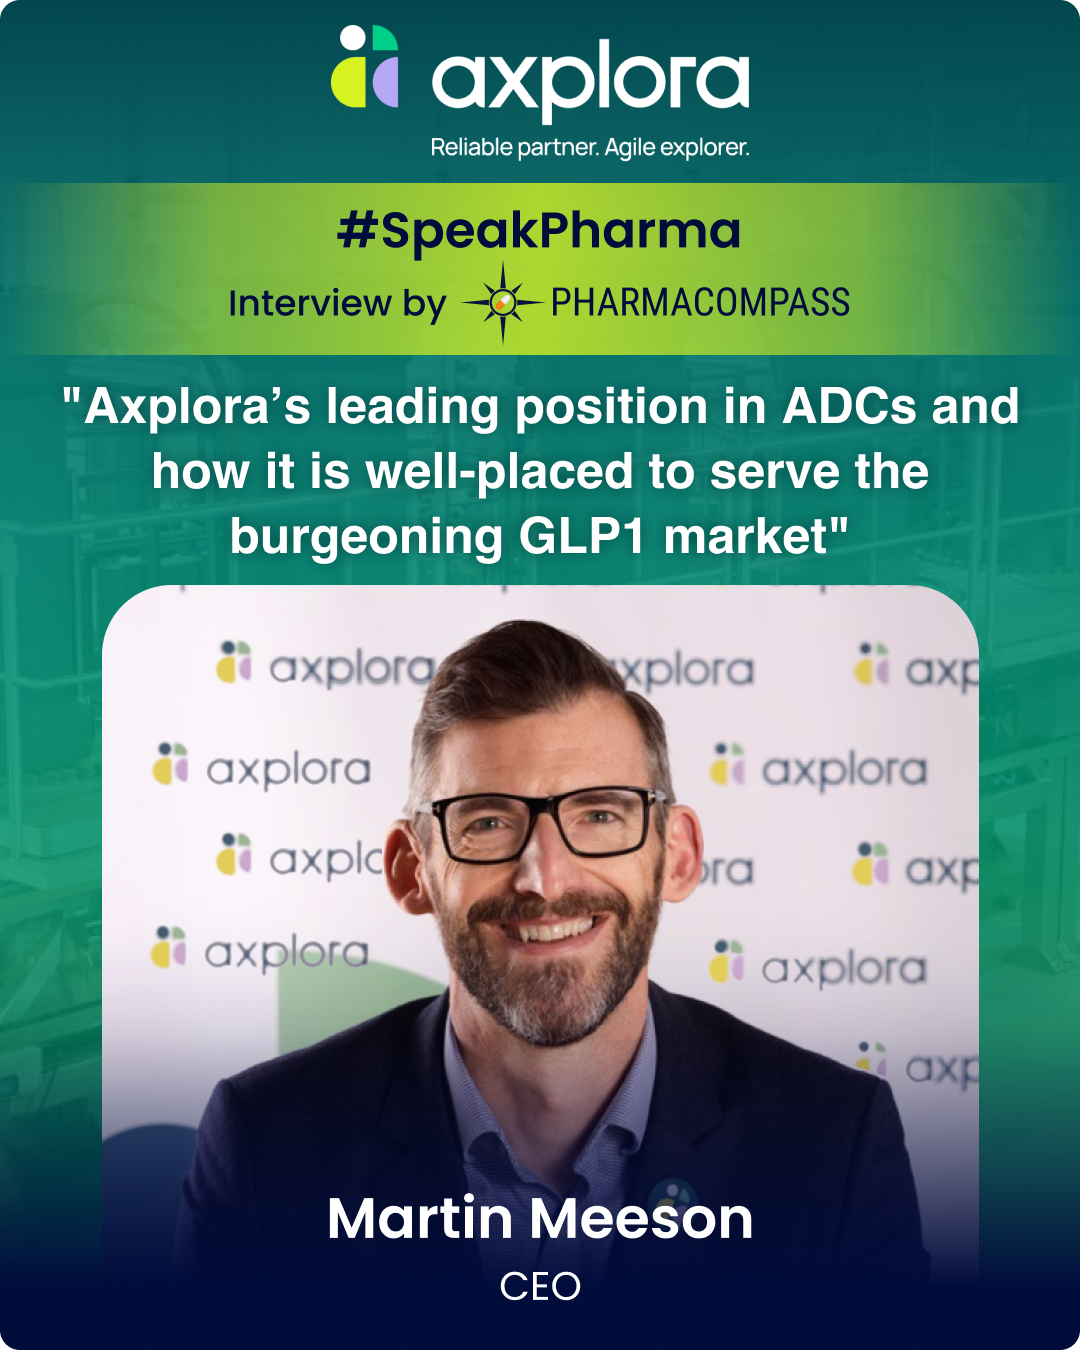 "Axplora’s leading position in ADCs and how it is well-placed to serve the burgeoning GLP1 market"